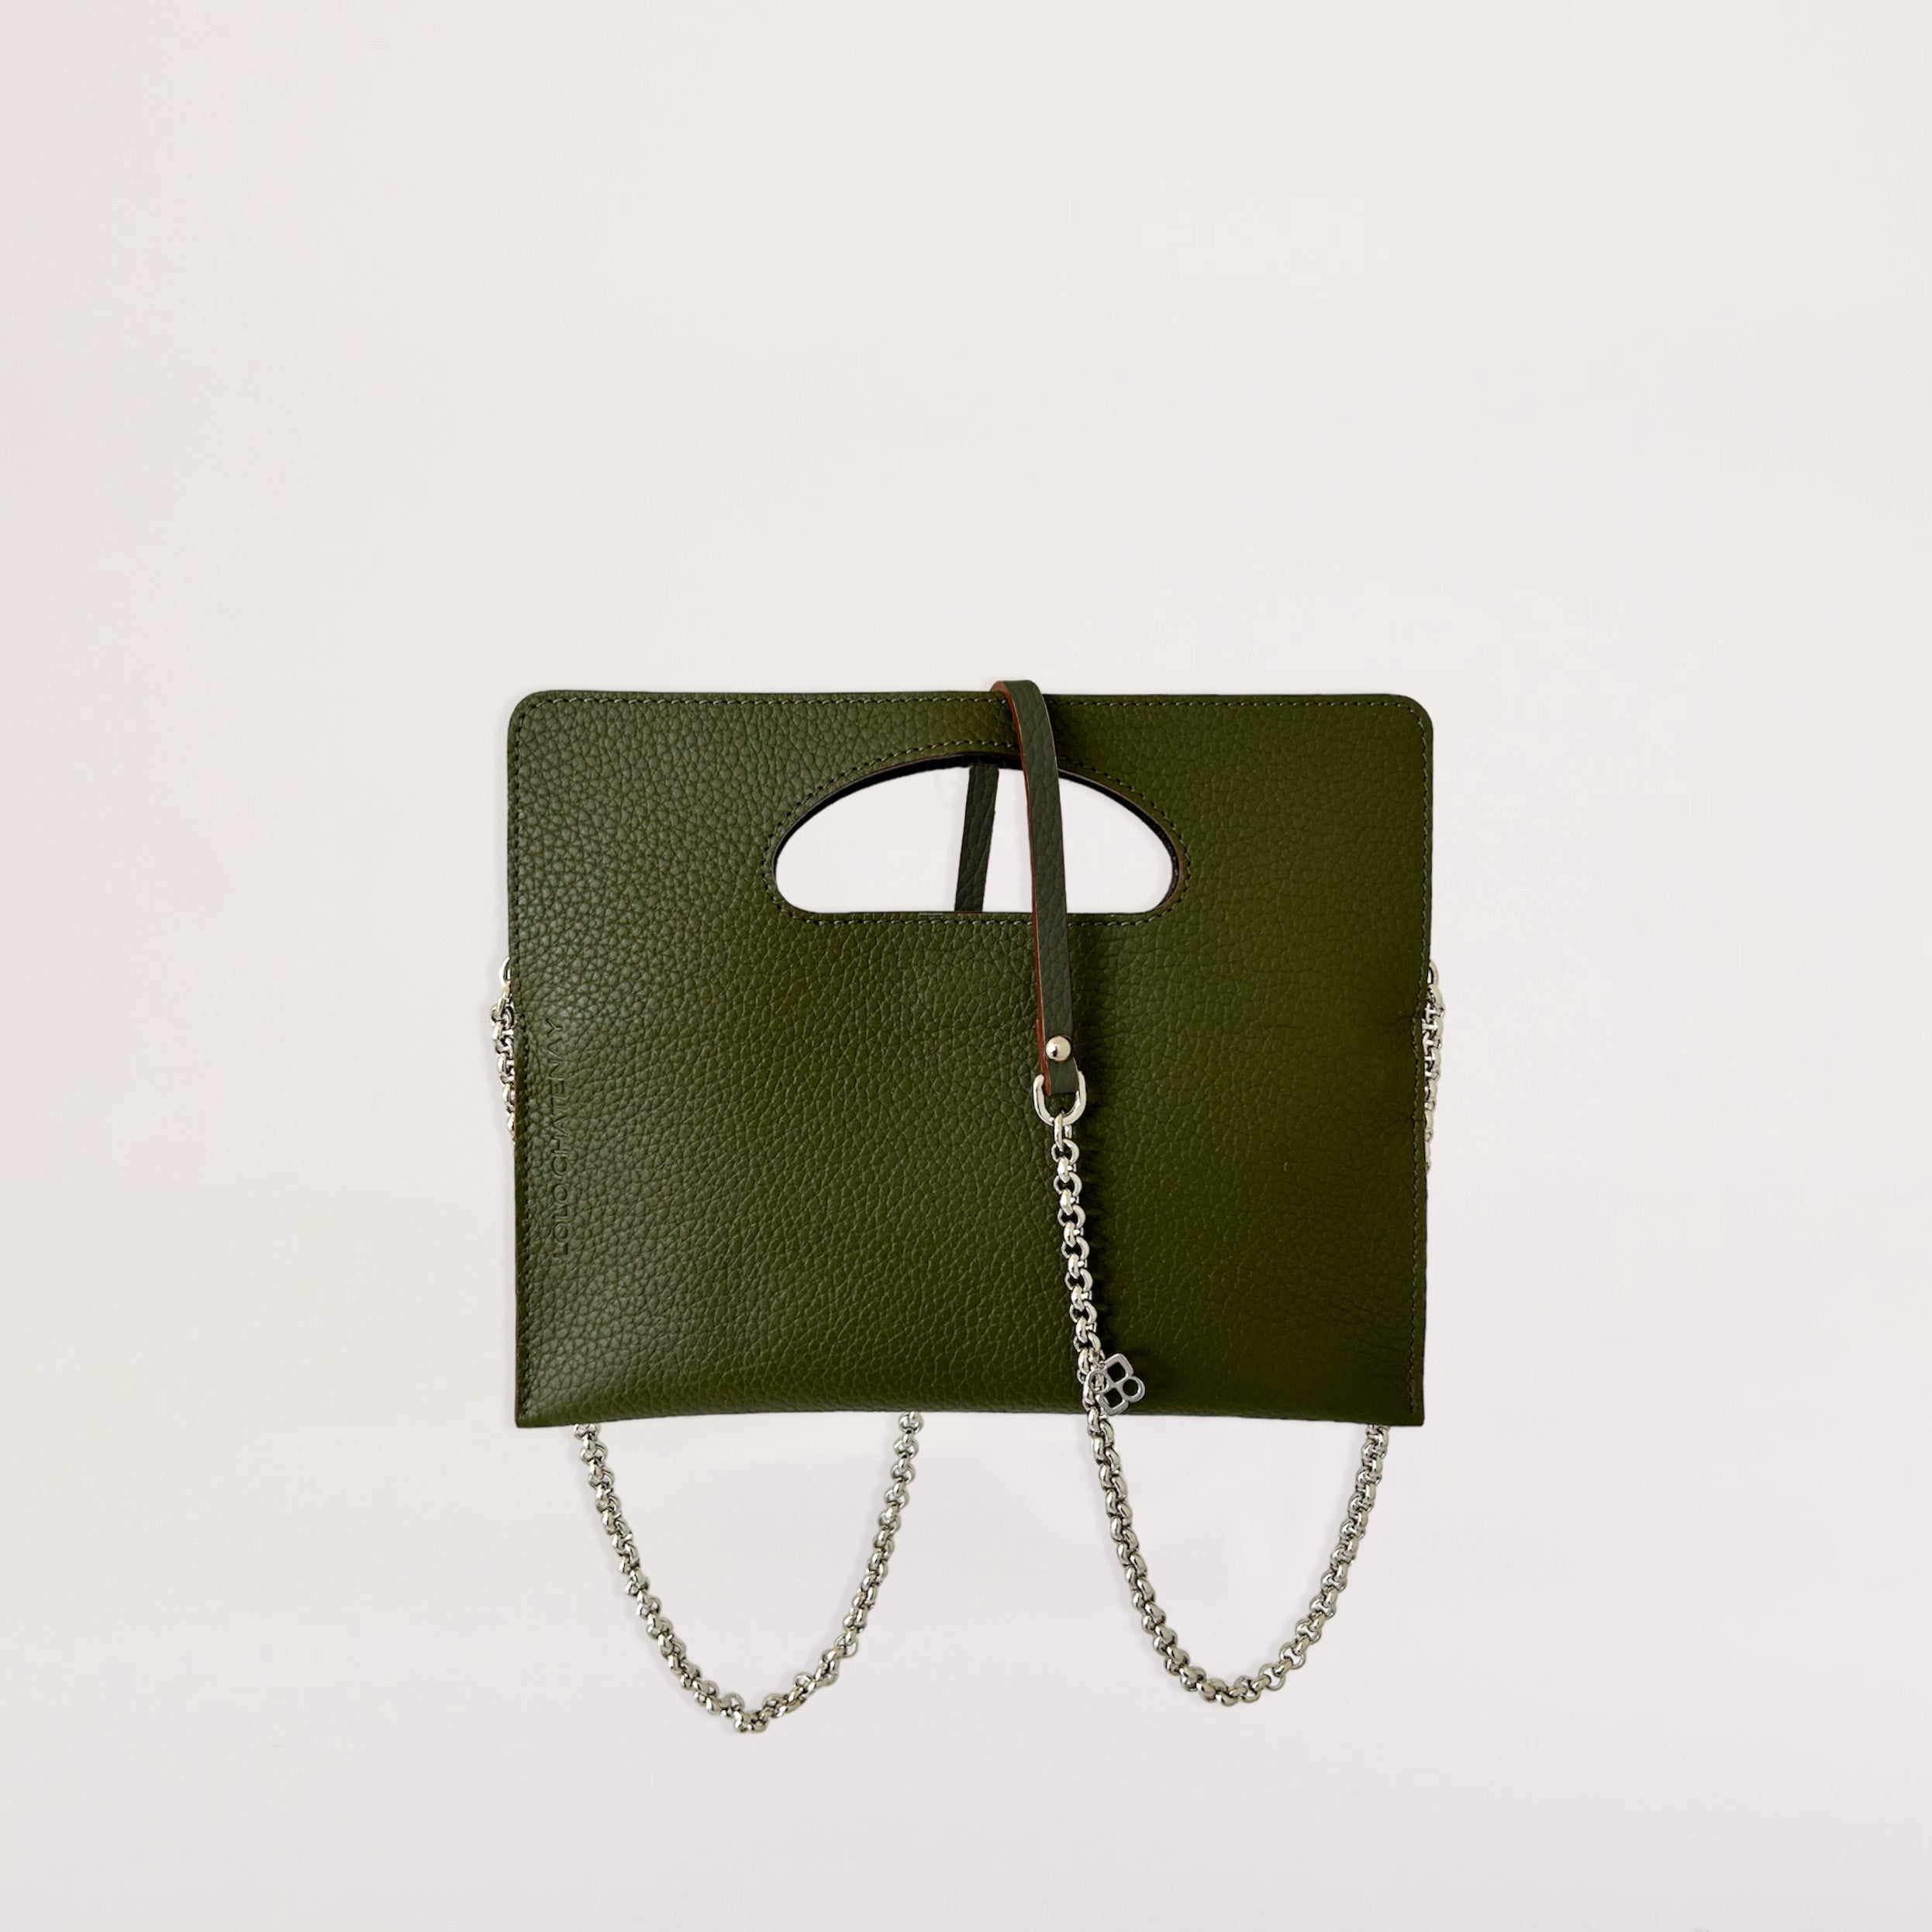 Louise clutch and shoulder chain